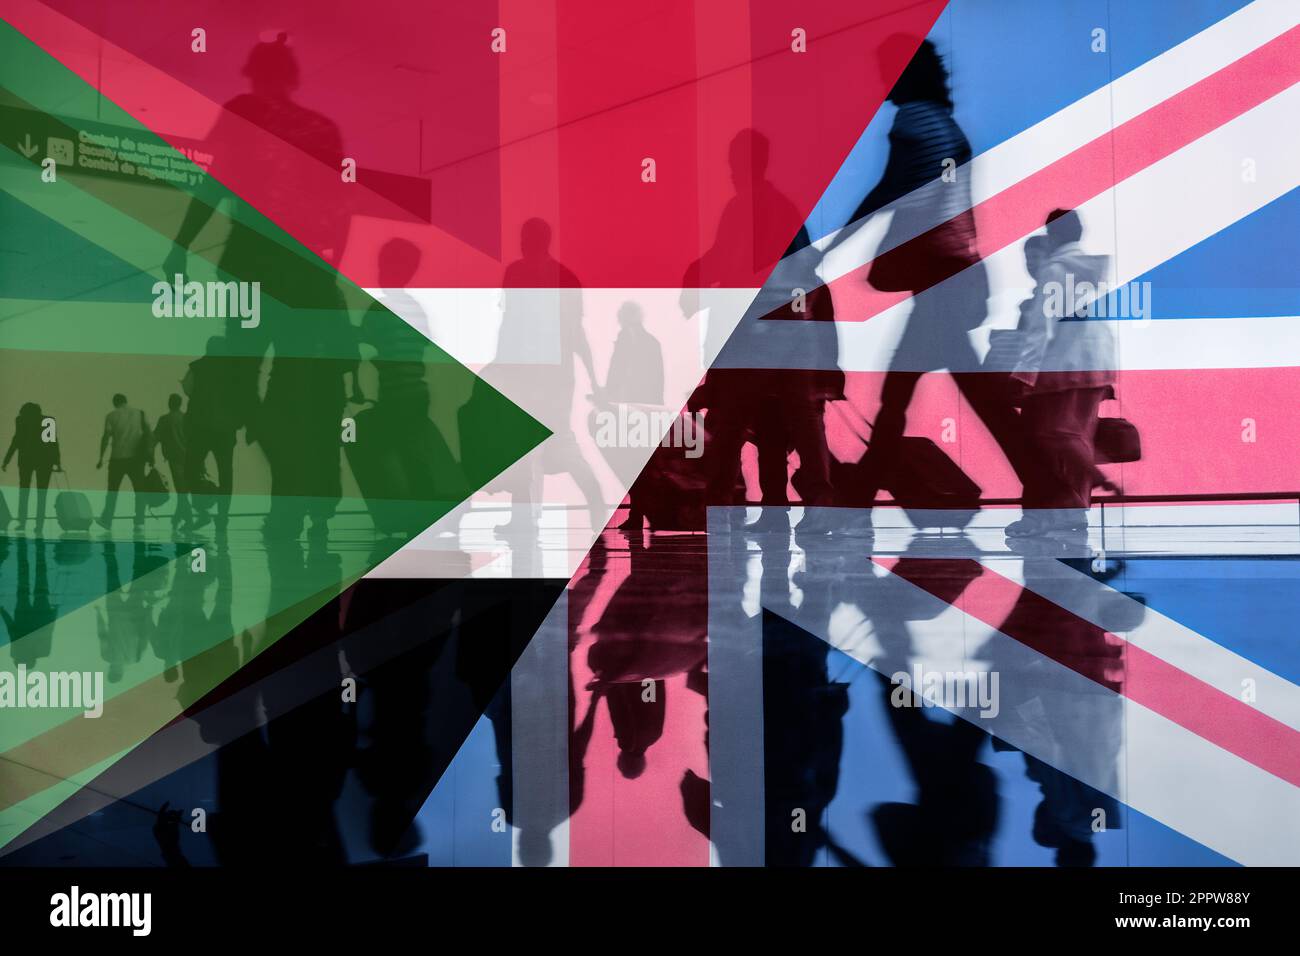 People with luggage in airport terminal with flags of Sudan and United Kingdom overlaid. Sudan, war, evacuation...concept Stock Photo